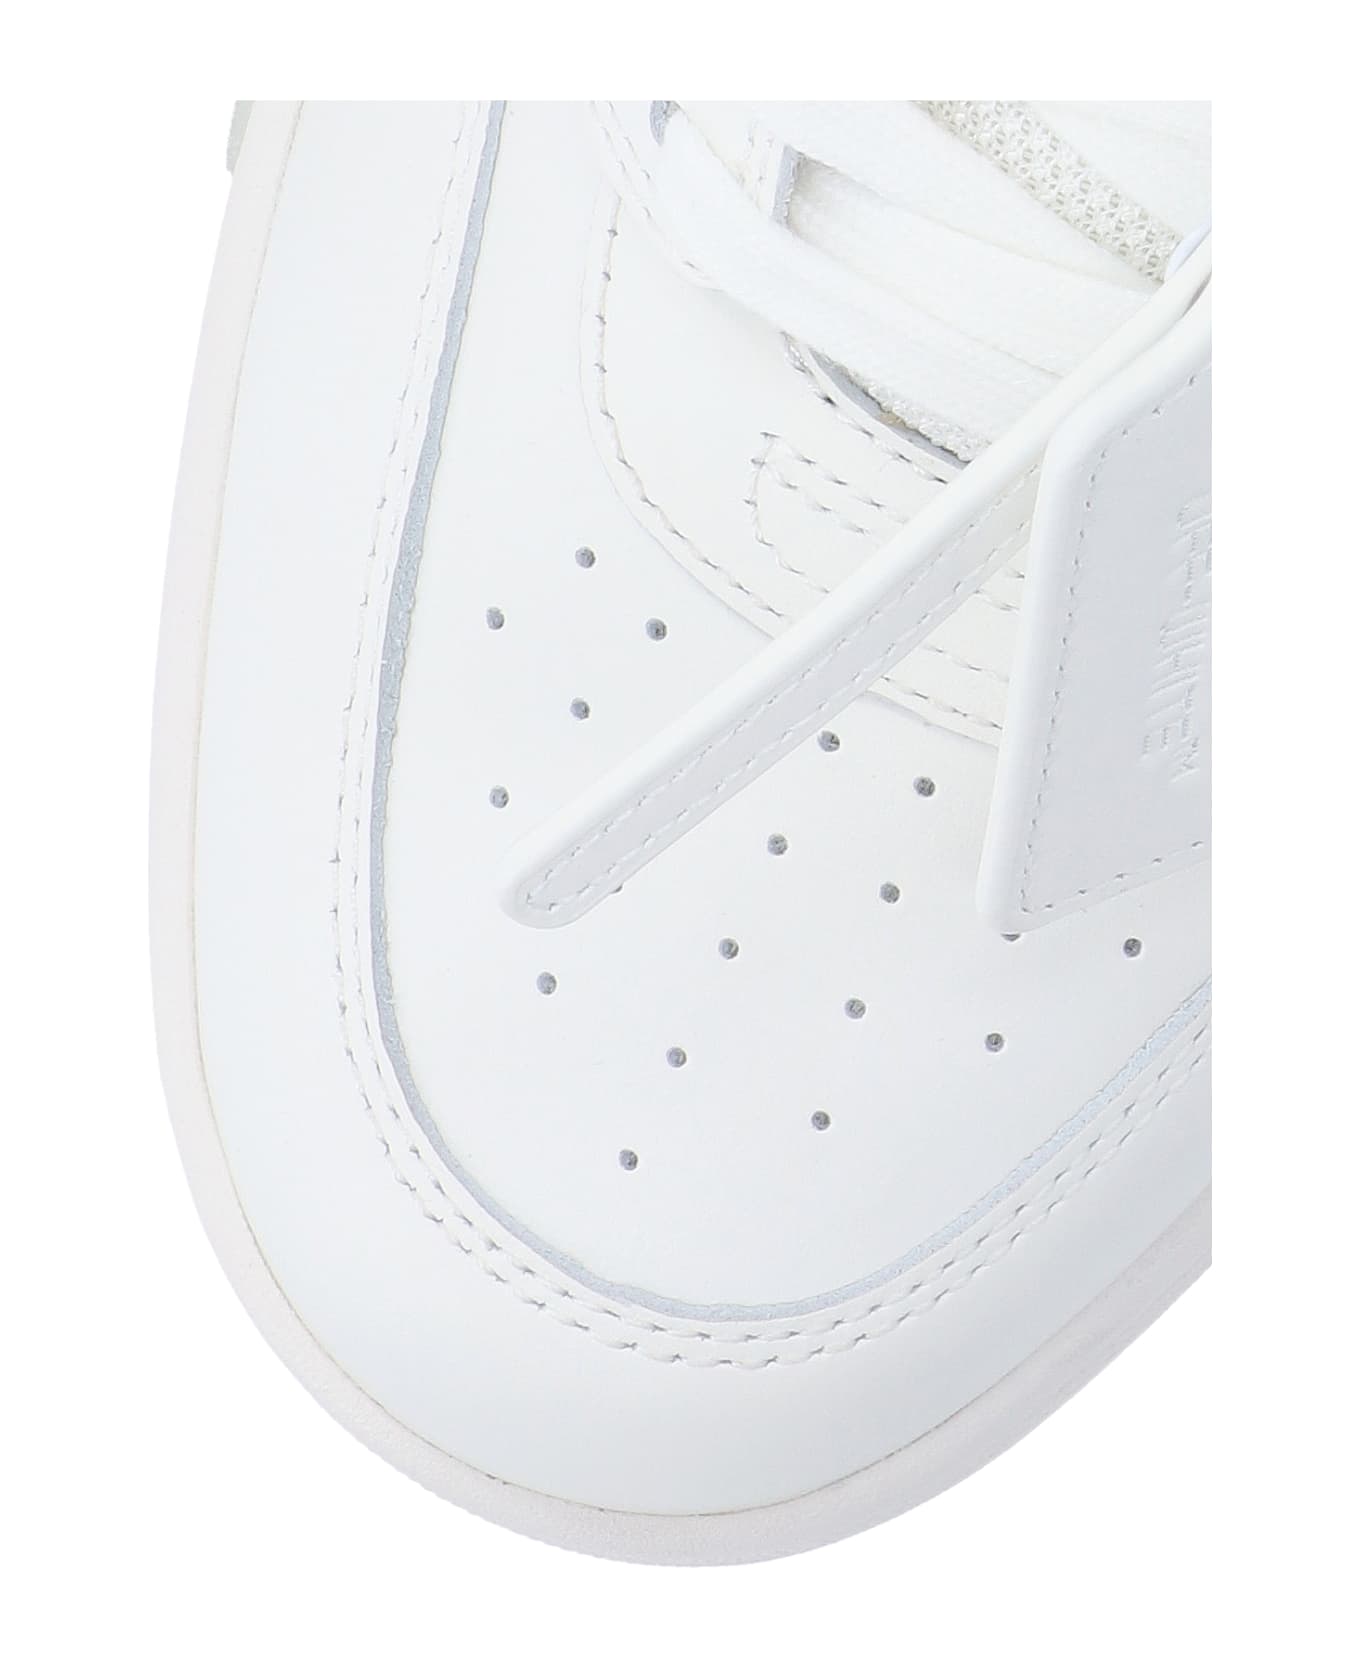 Off-White Sneakers High 'out Of Office' - White White スニーカー